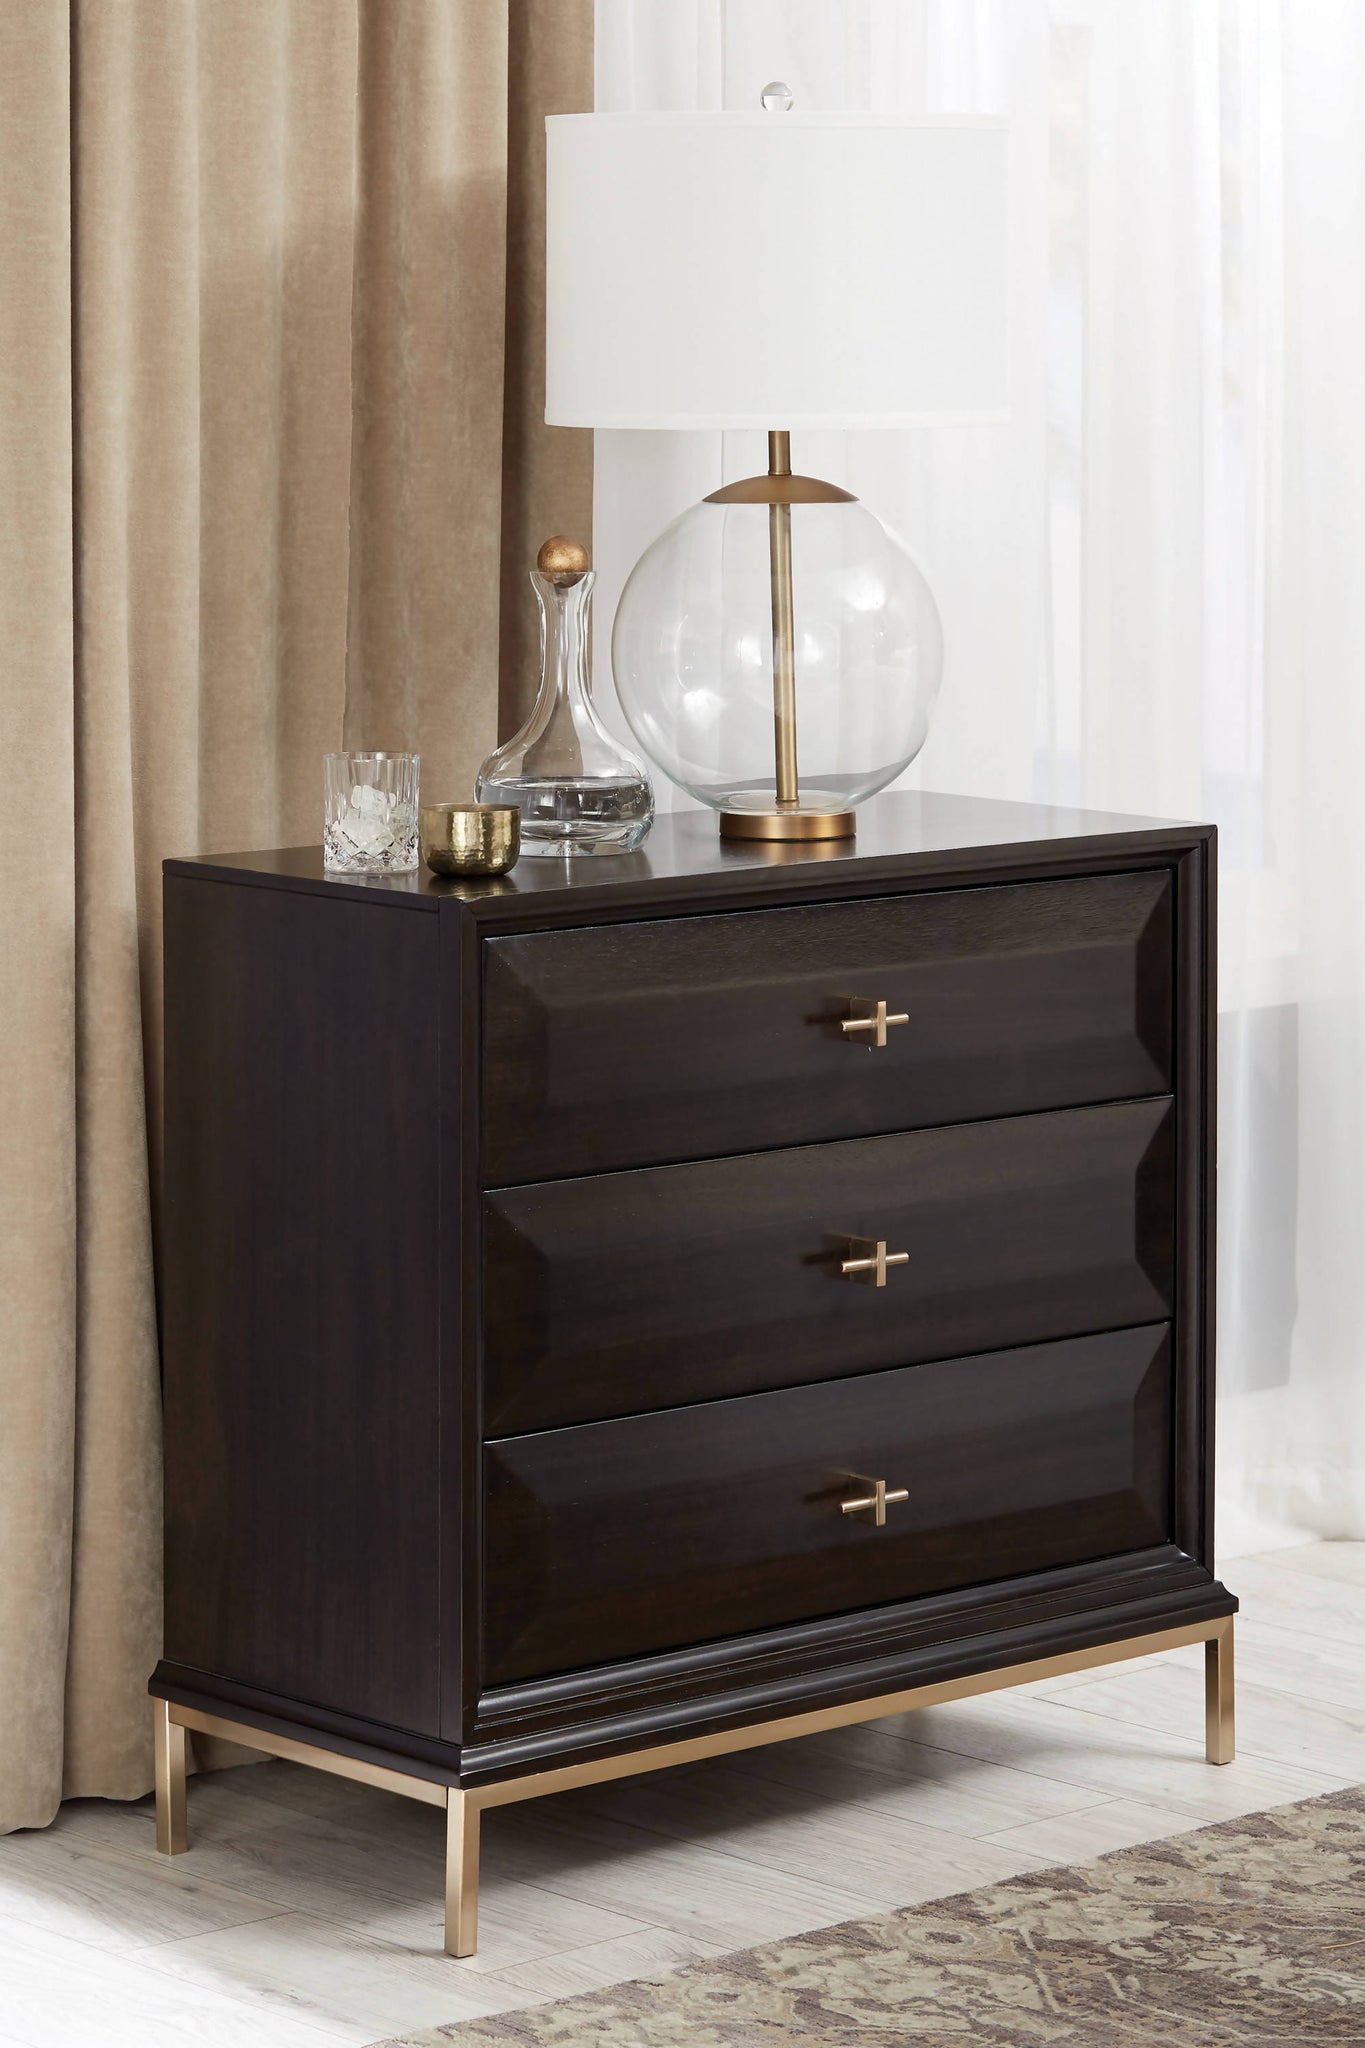 Formosa 3-Drawer Rectangular Nightstand Americano And Rose Brass Collection: Formosa SKU: 222842